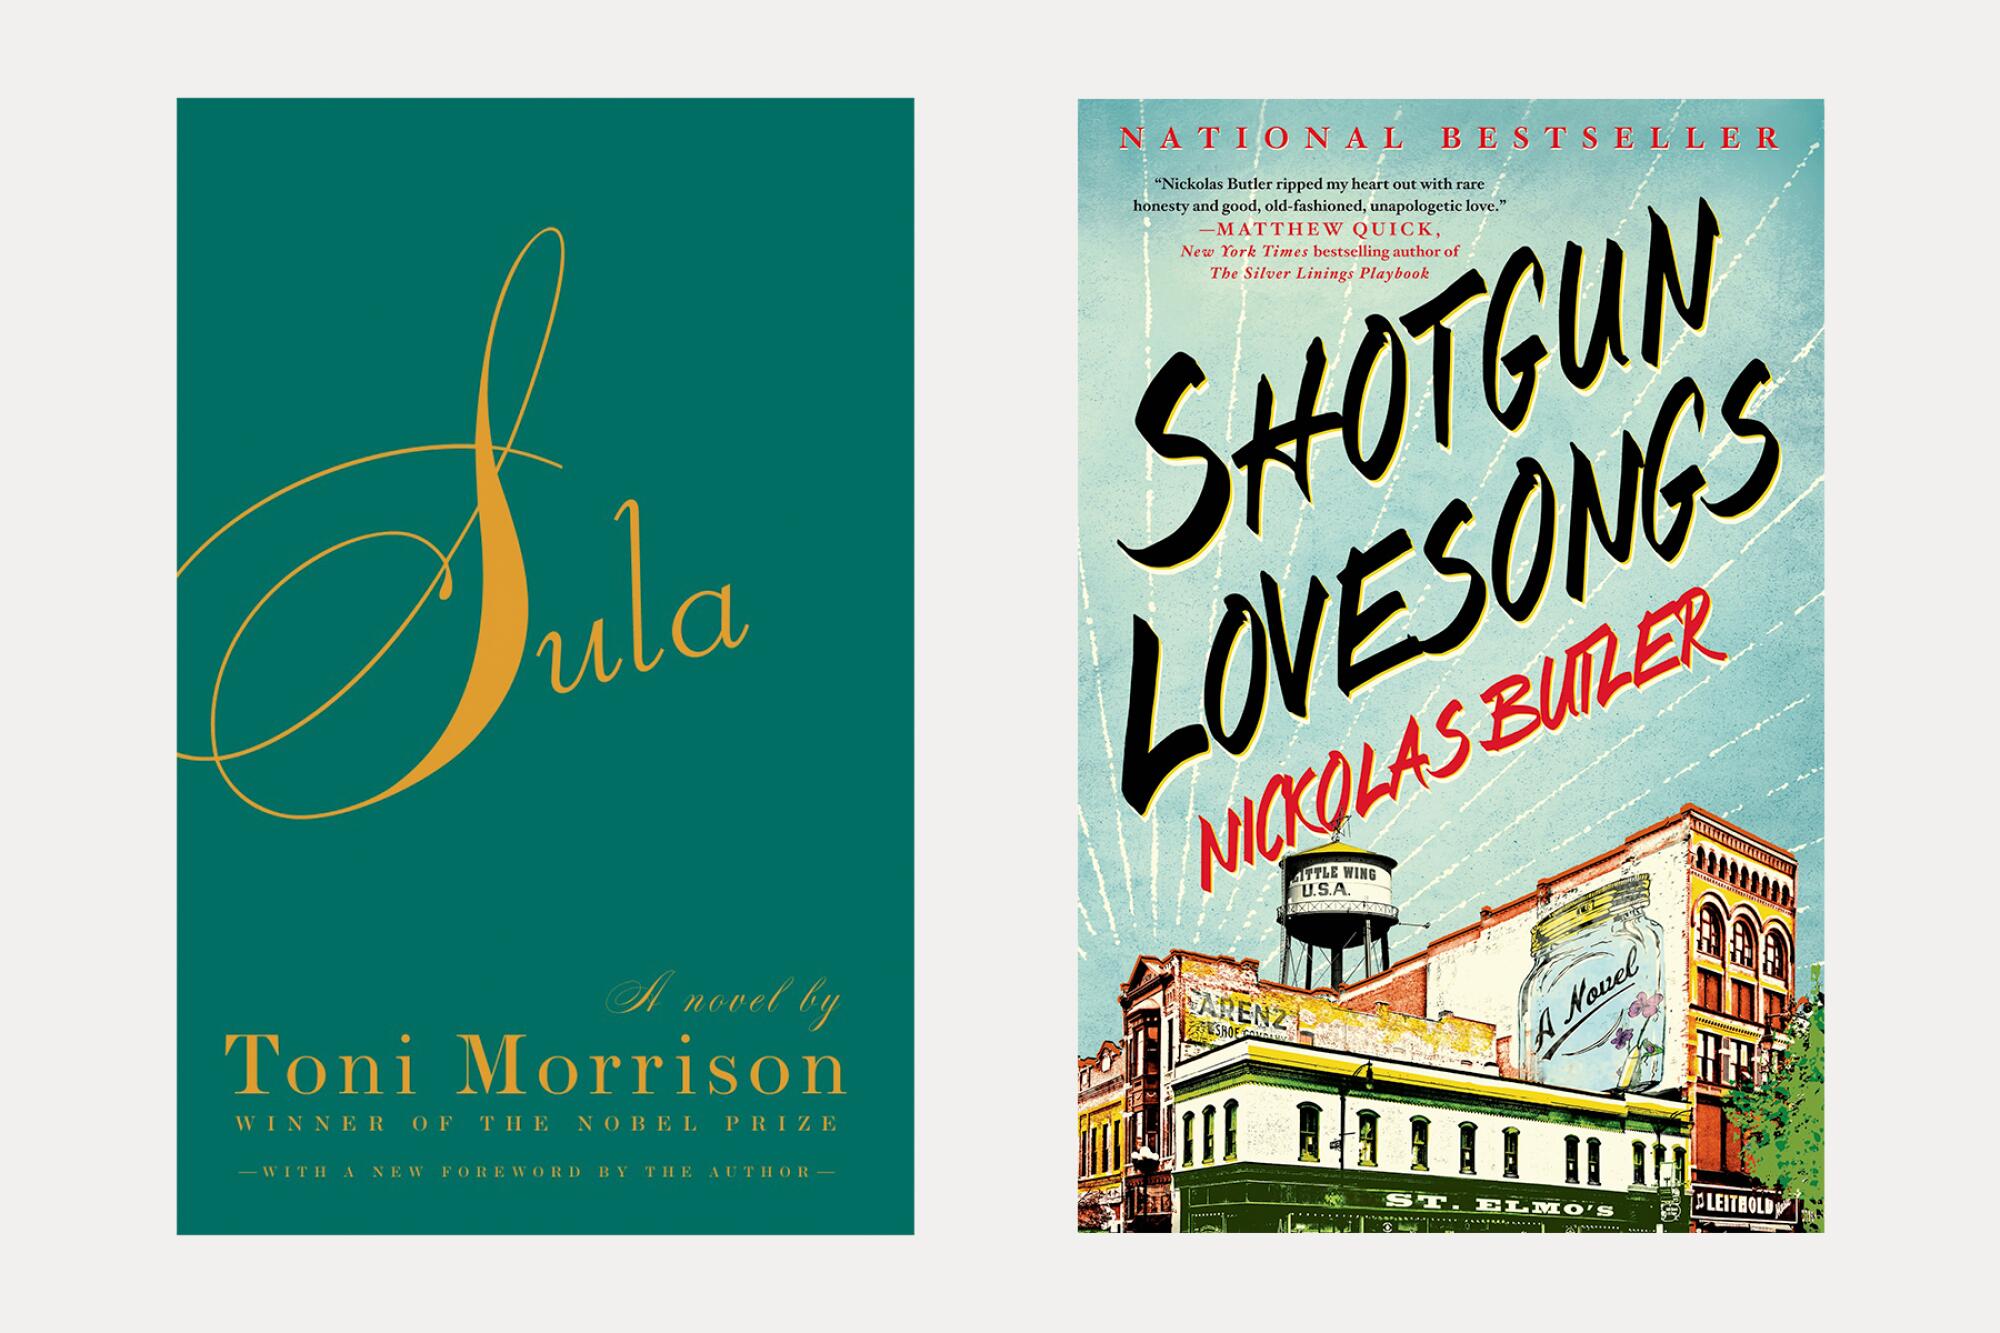 Two book covers: Sula by Toni Morrison, and Shotgun Lovesongs by Nickolas Butler